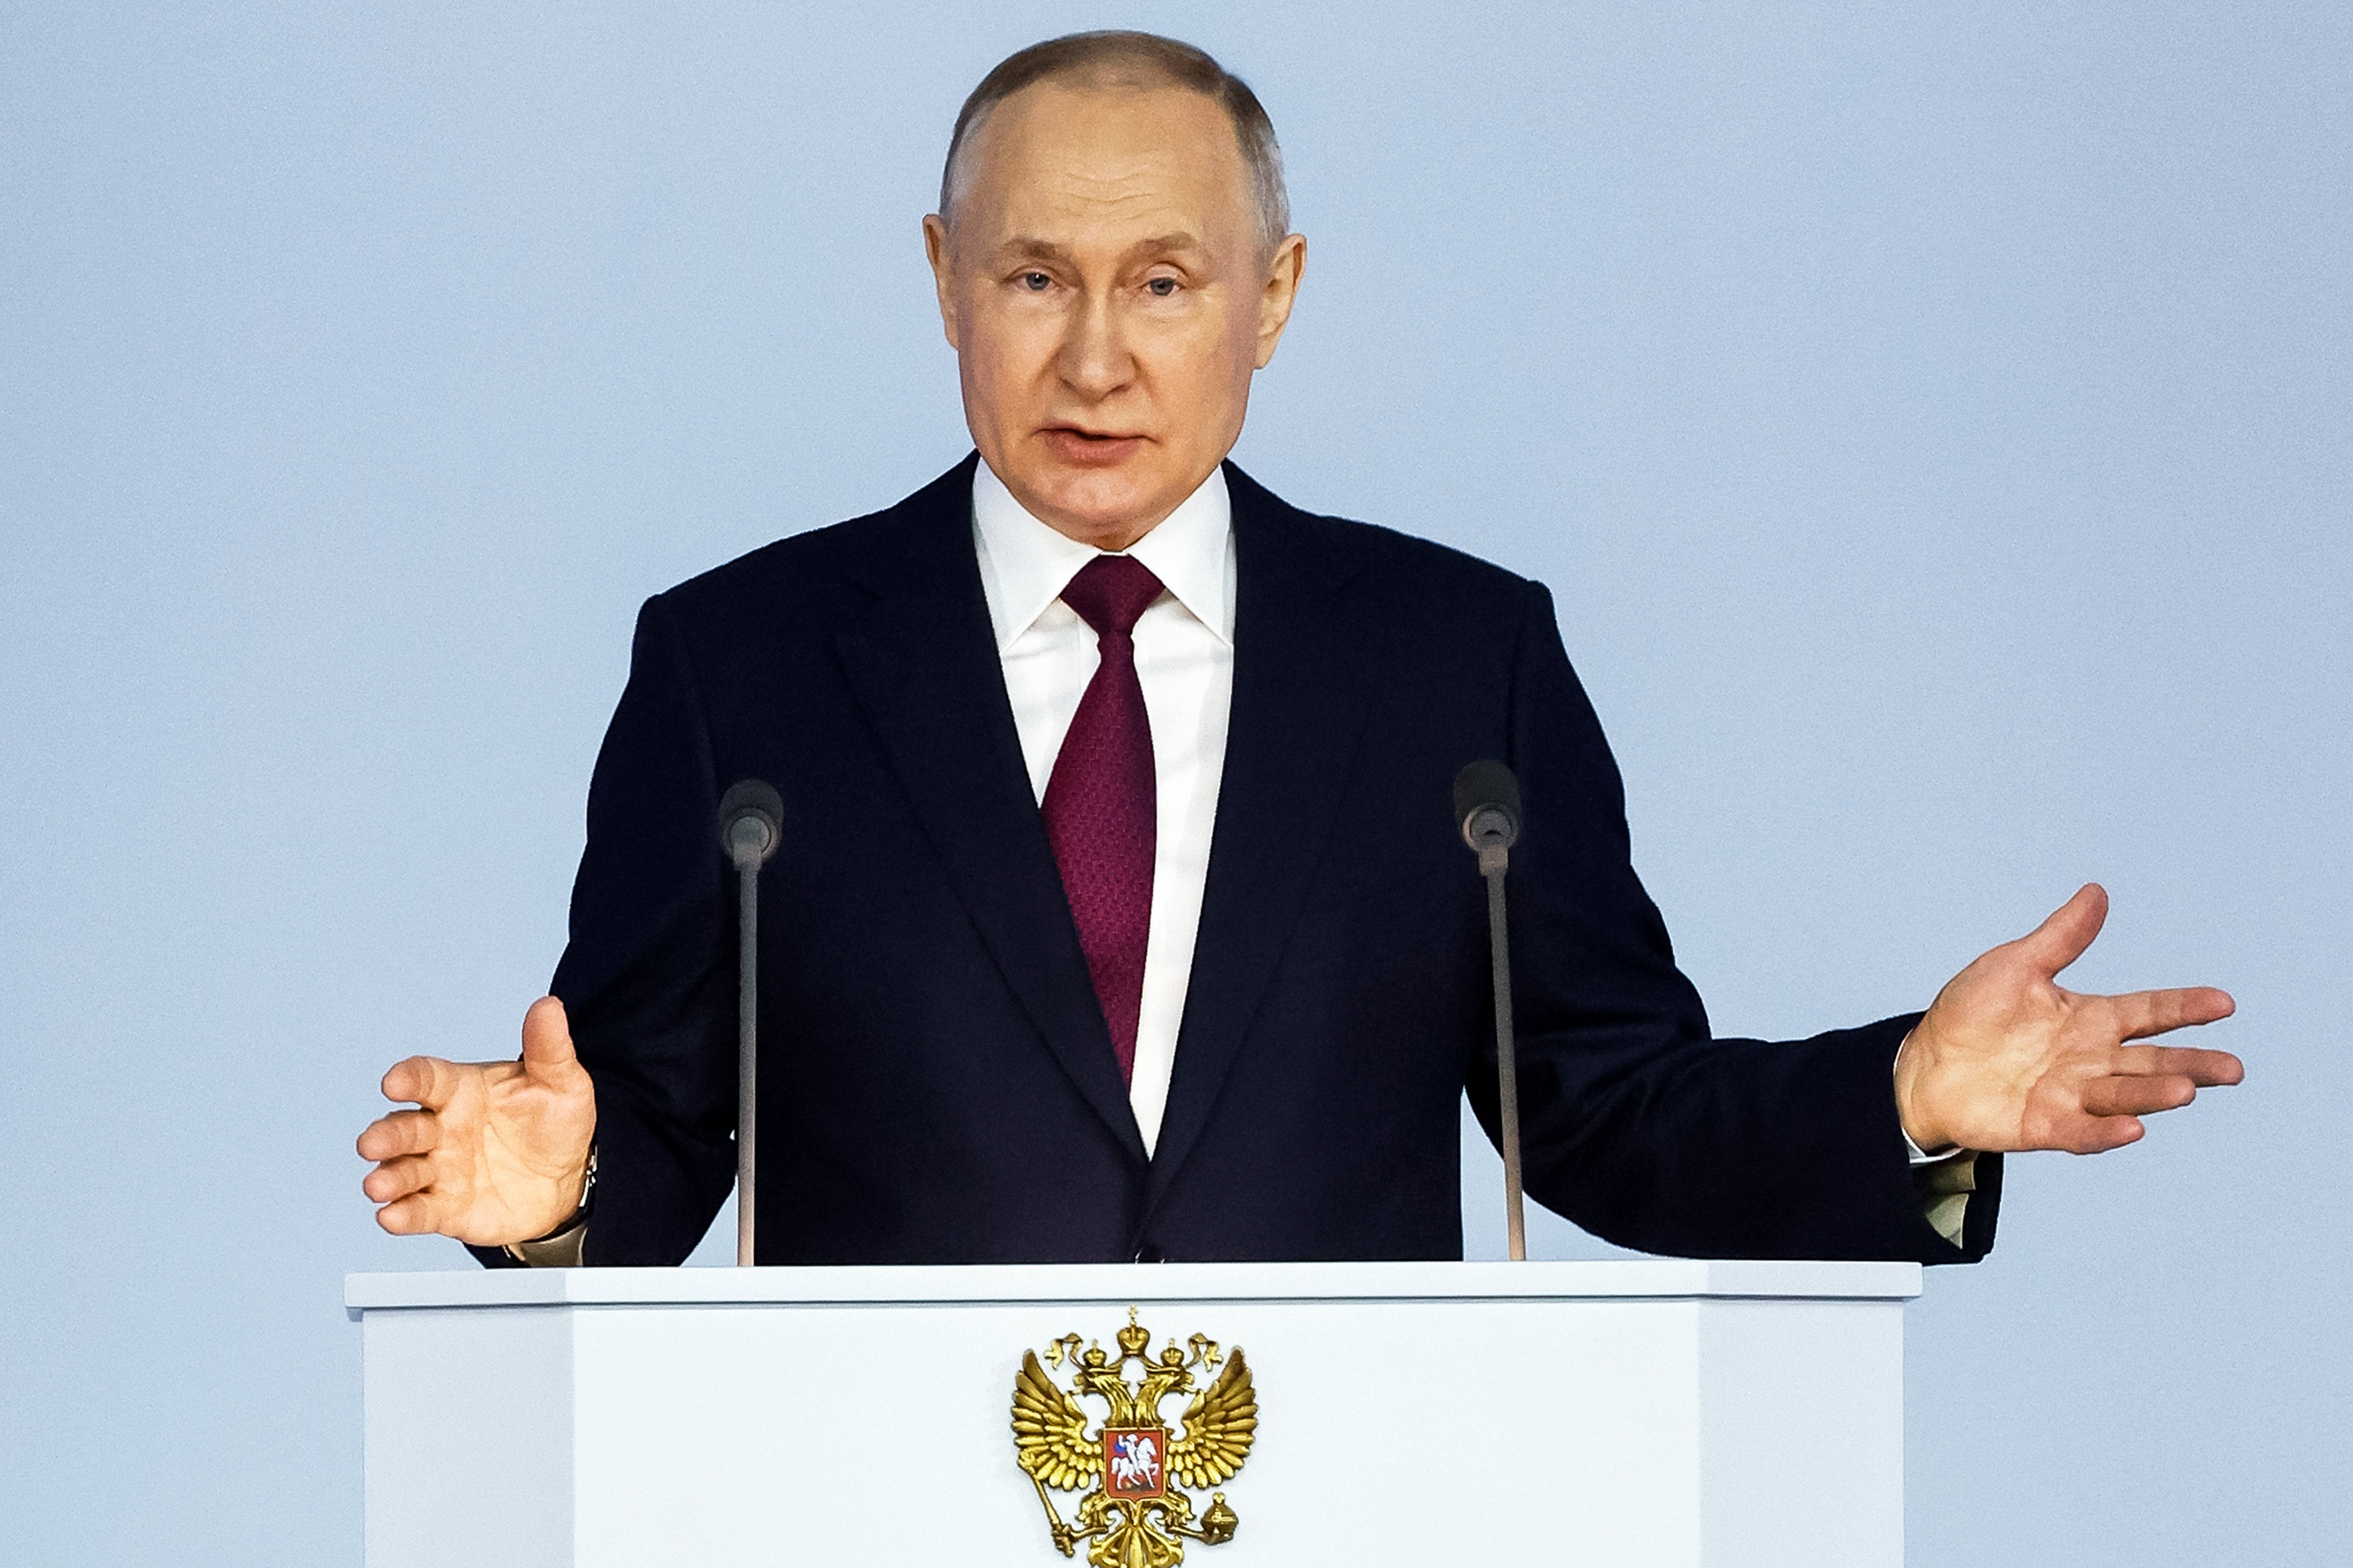 Russian president Vladimir Putin gestures as he gives his annual state of the nation address